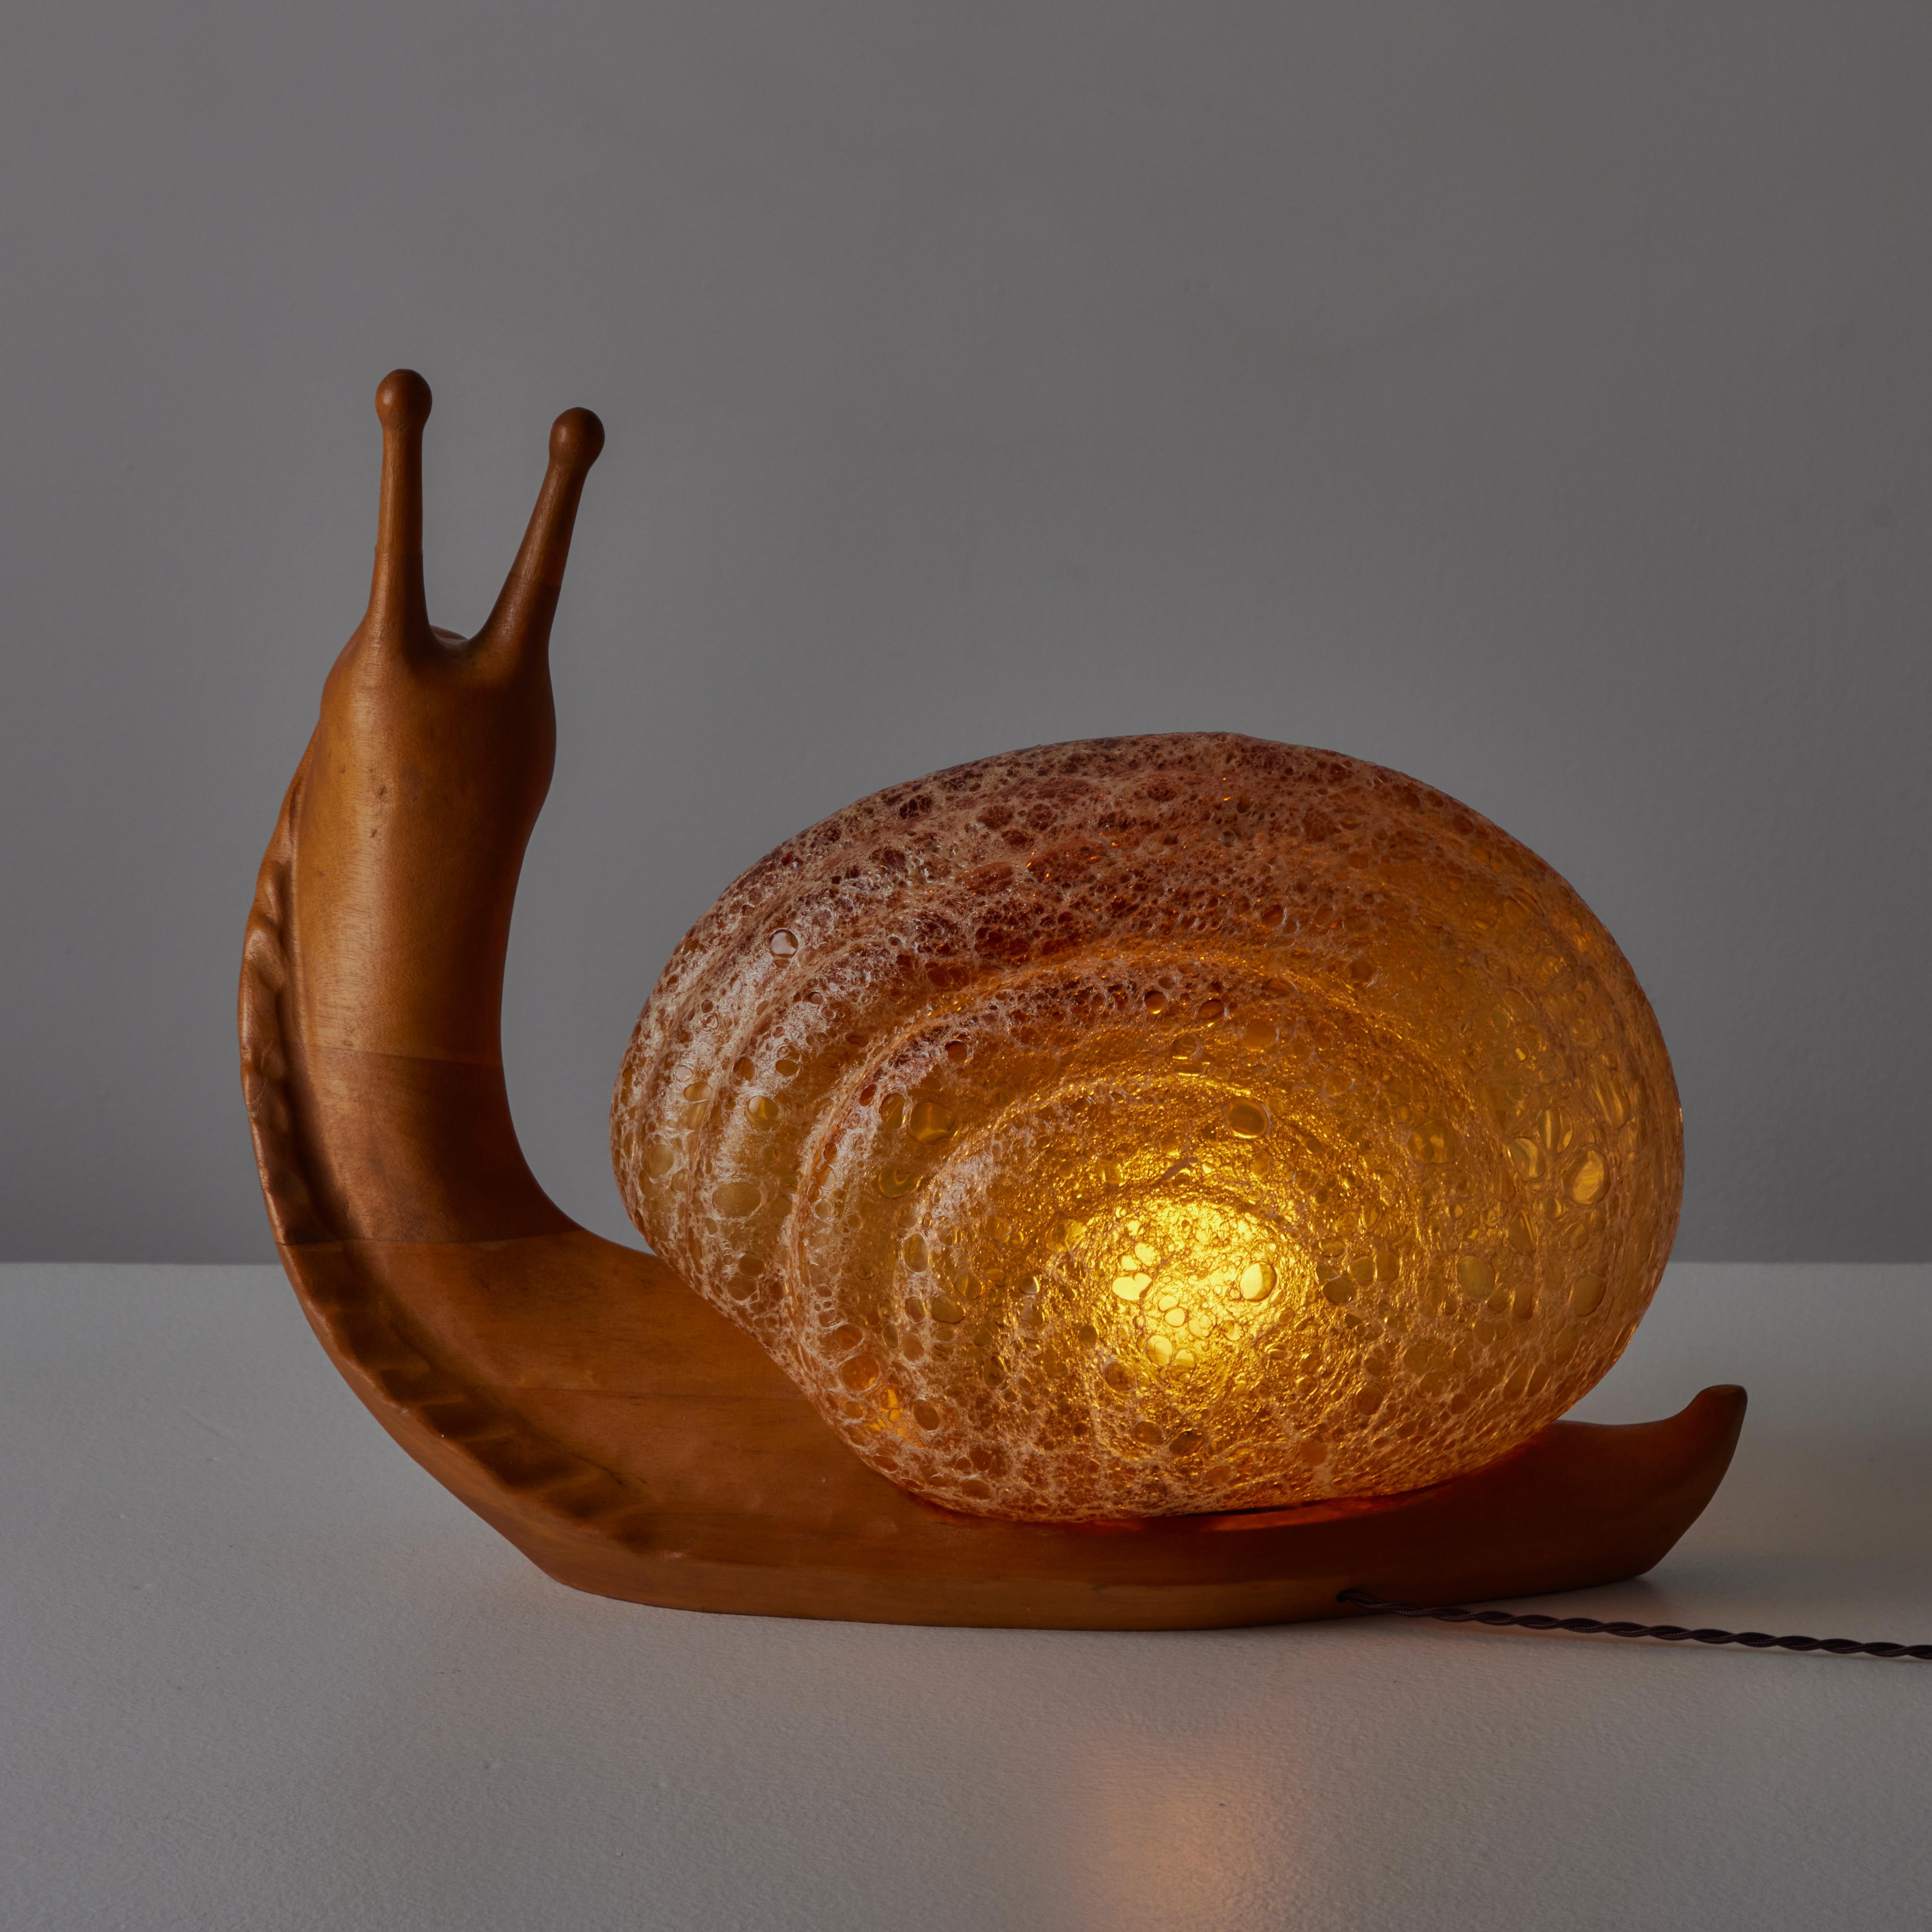 Snail Table lamp by Marzio Cecchi for Dimensione Fuoco. Designed and manufactured in Italy, circa 1970s. A carved wooden body paired along with a texturized glass diffuser. Engraved signature on the front of the wood. Holds a single E14 socket type,